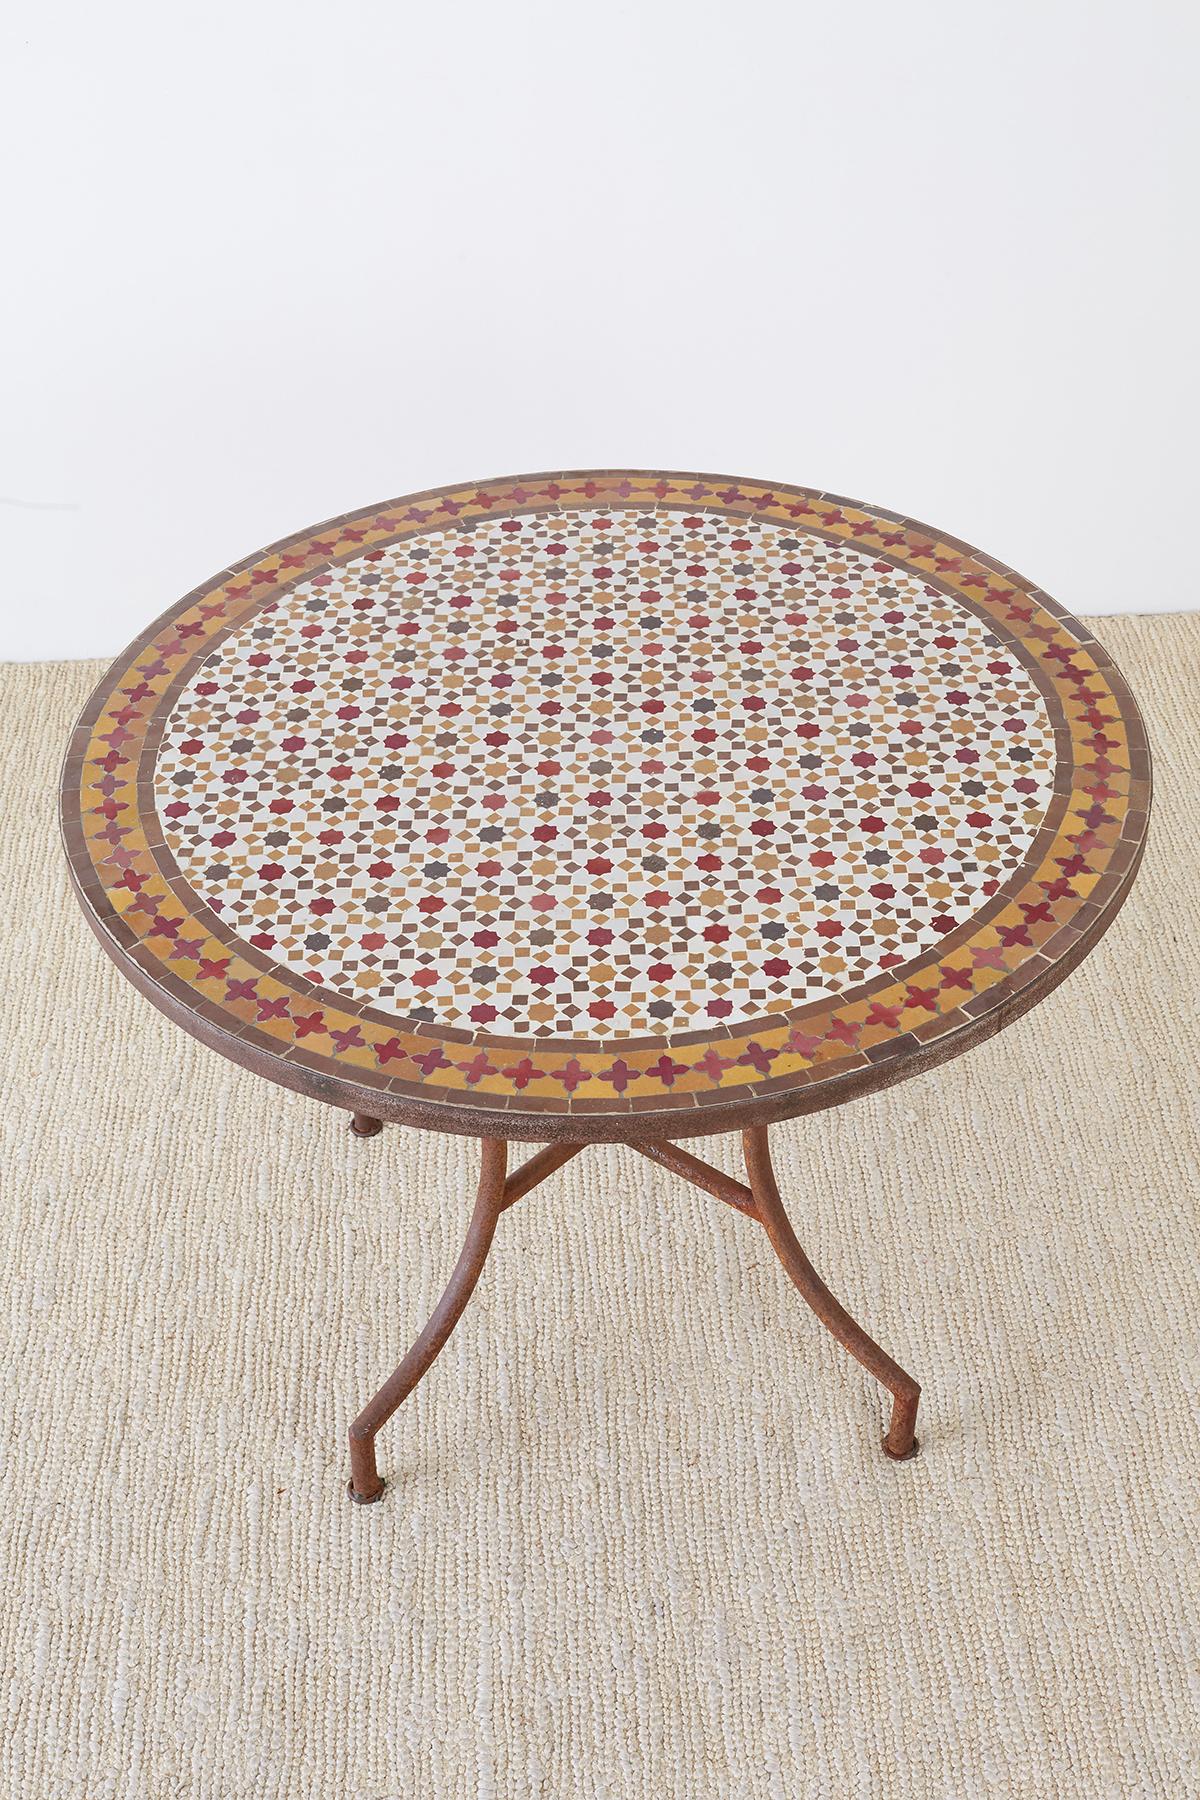 Spanish Dining Table with Moroccan Mosaic Tile Inlay 5